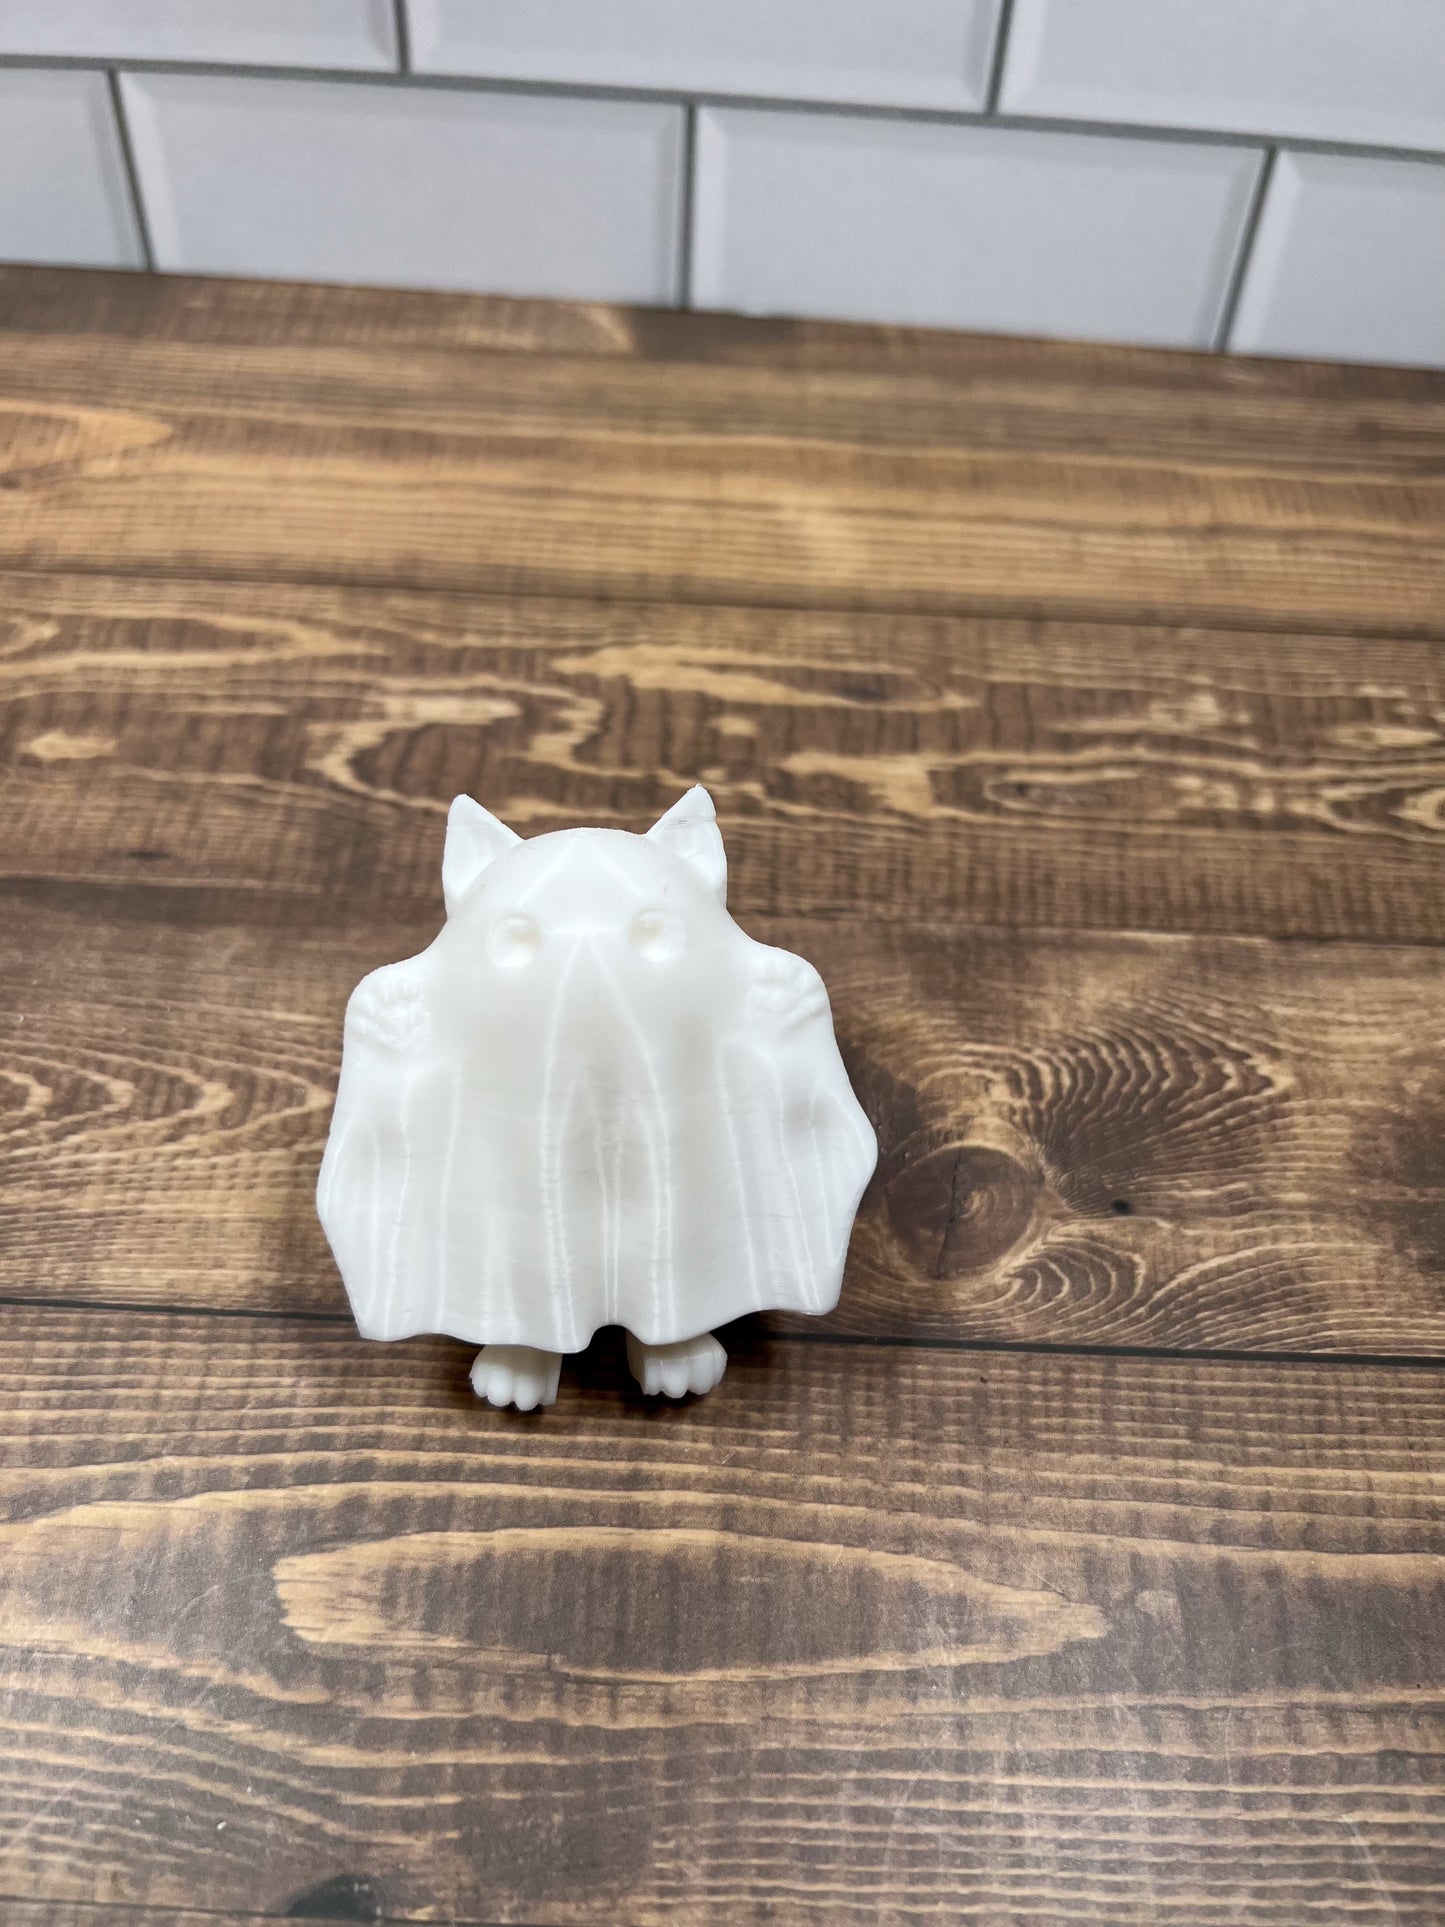 3D Printed Articulated Ghost Cat Decoration